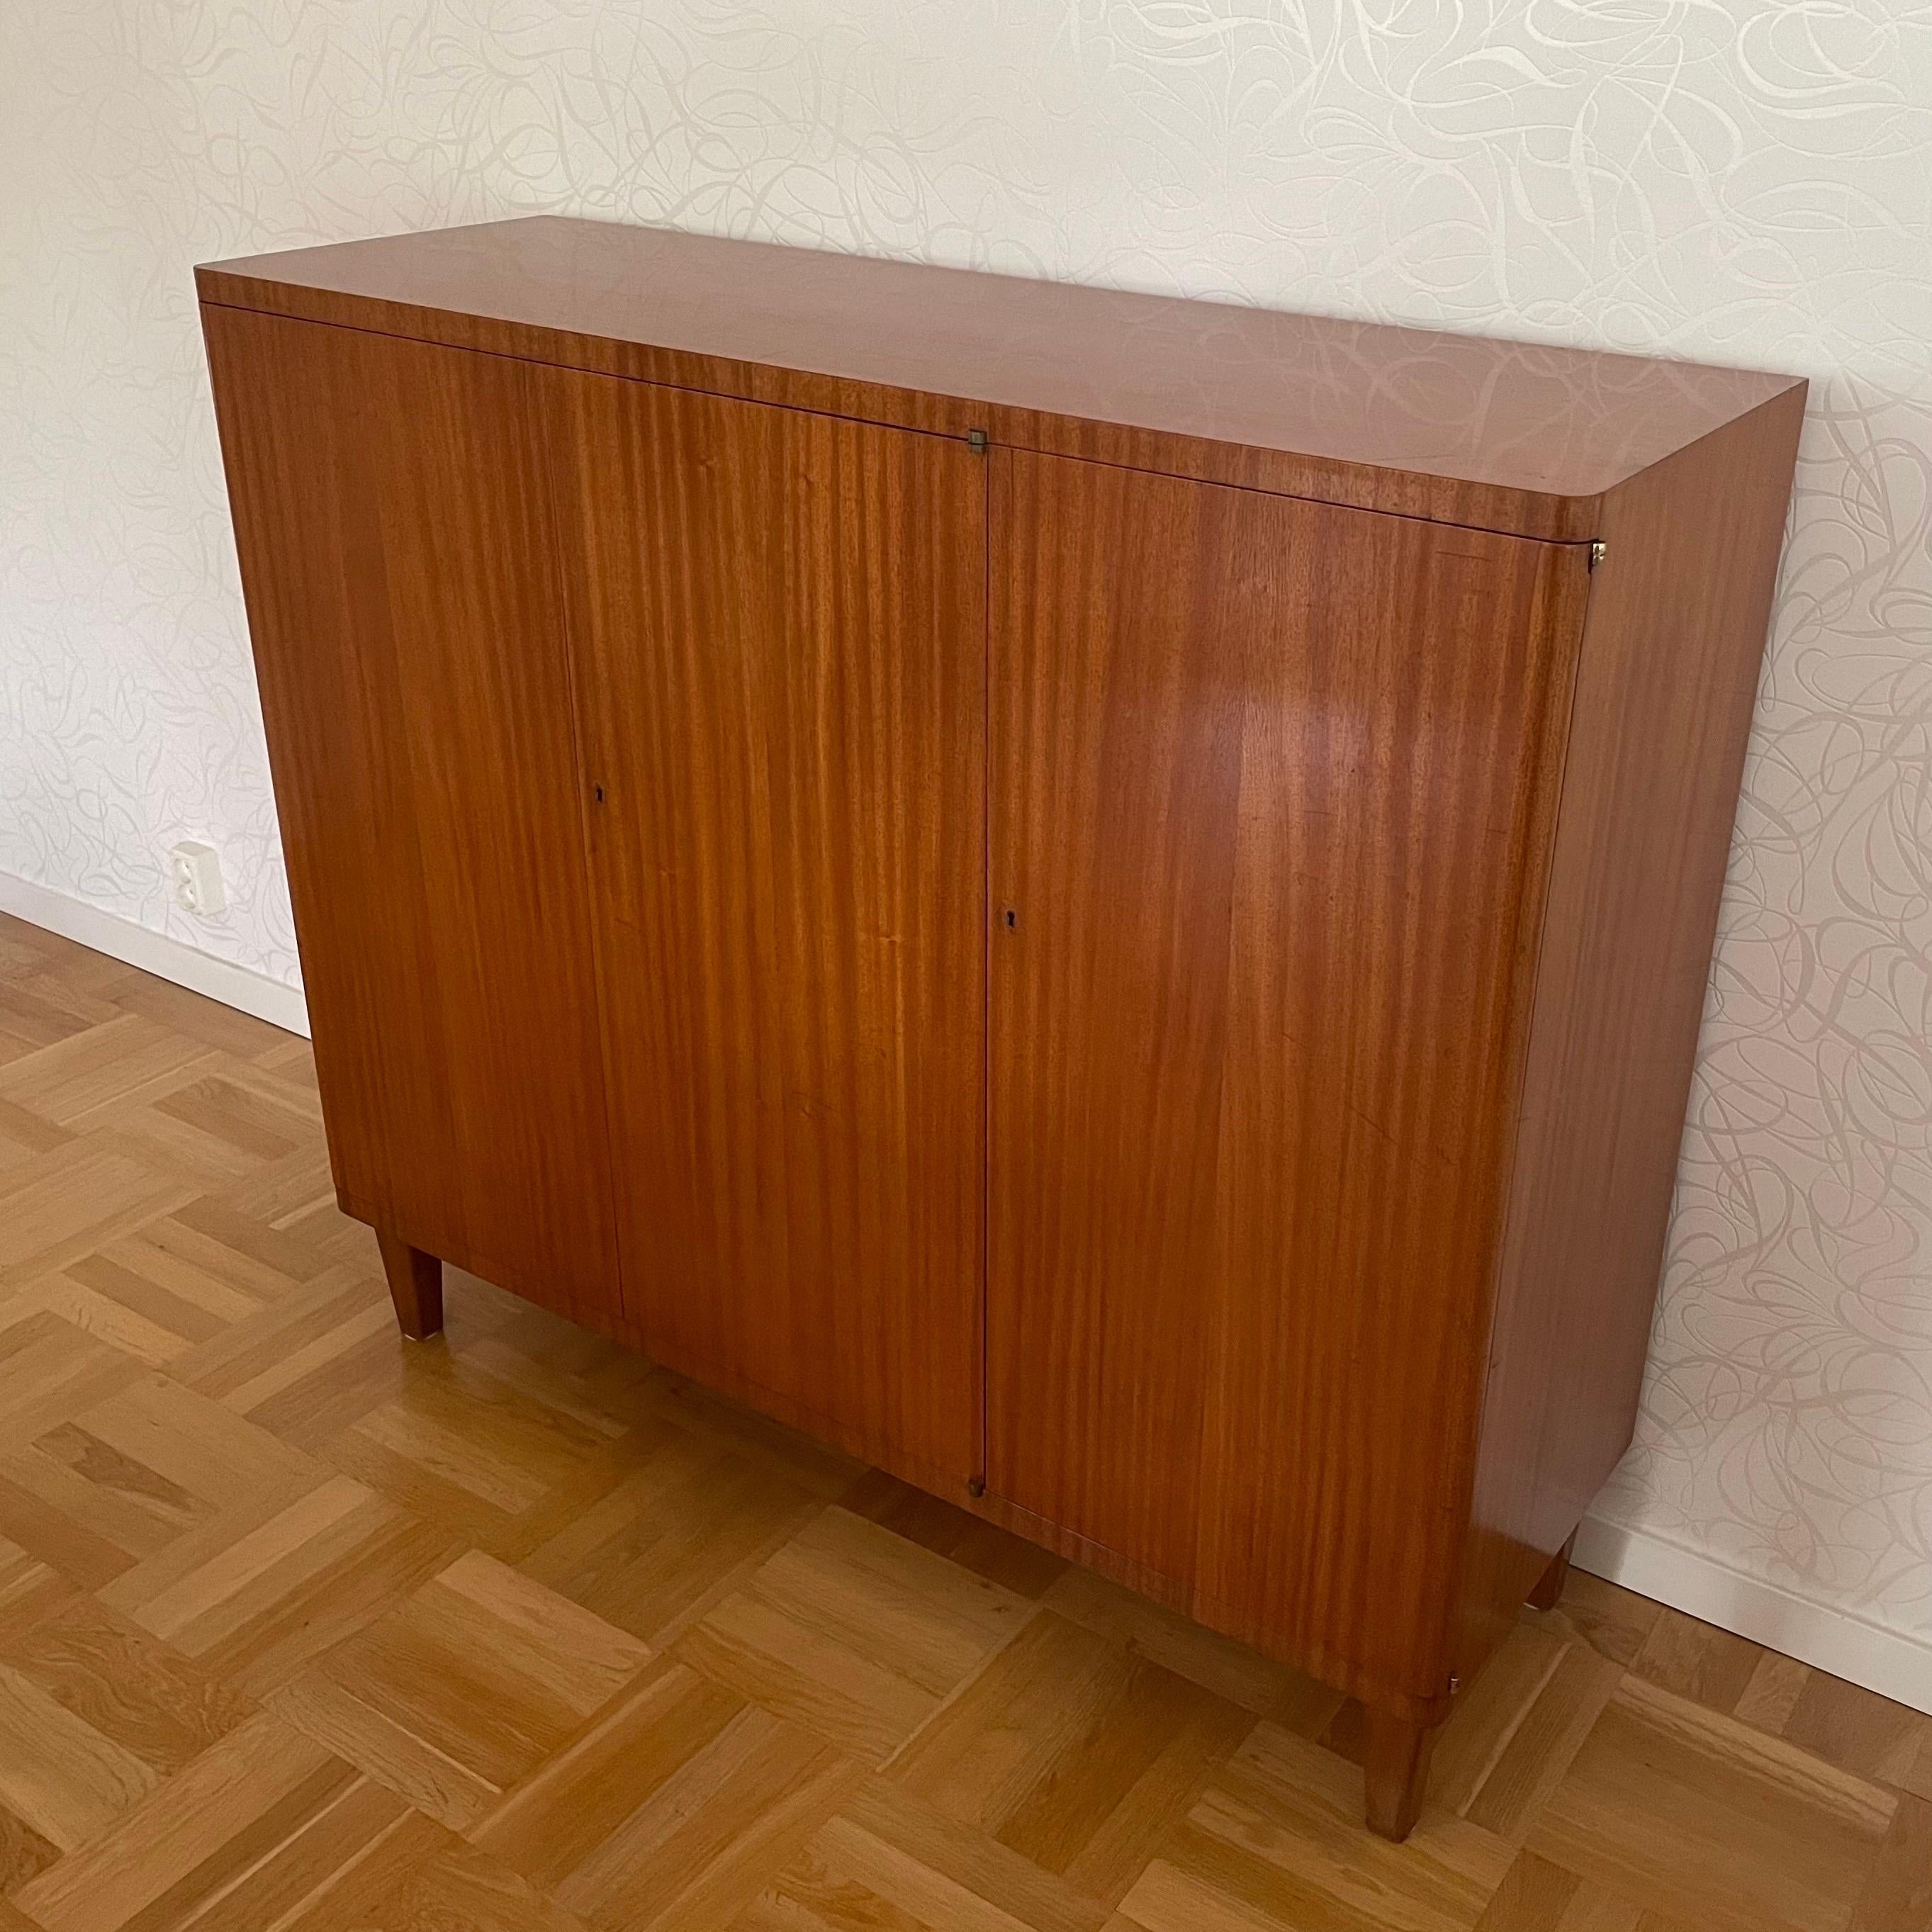 This is a Swedish Modern three doors cabinet manufactured by Nordiska Kompaniet 1944. The designed is attributed to Axel Einar Hjorth.

It comes veneered in mahogany.
The inside and the shelves are veneered with natural colored birch.
Behind the